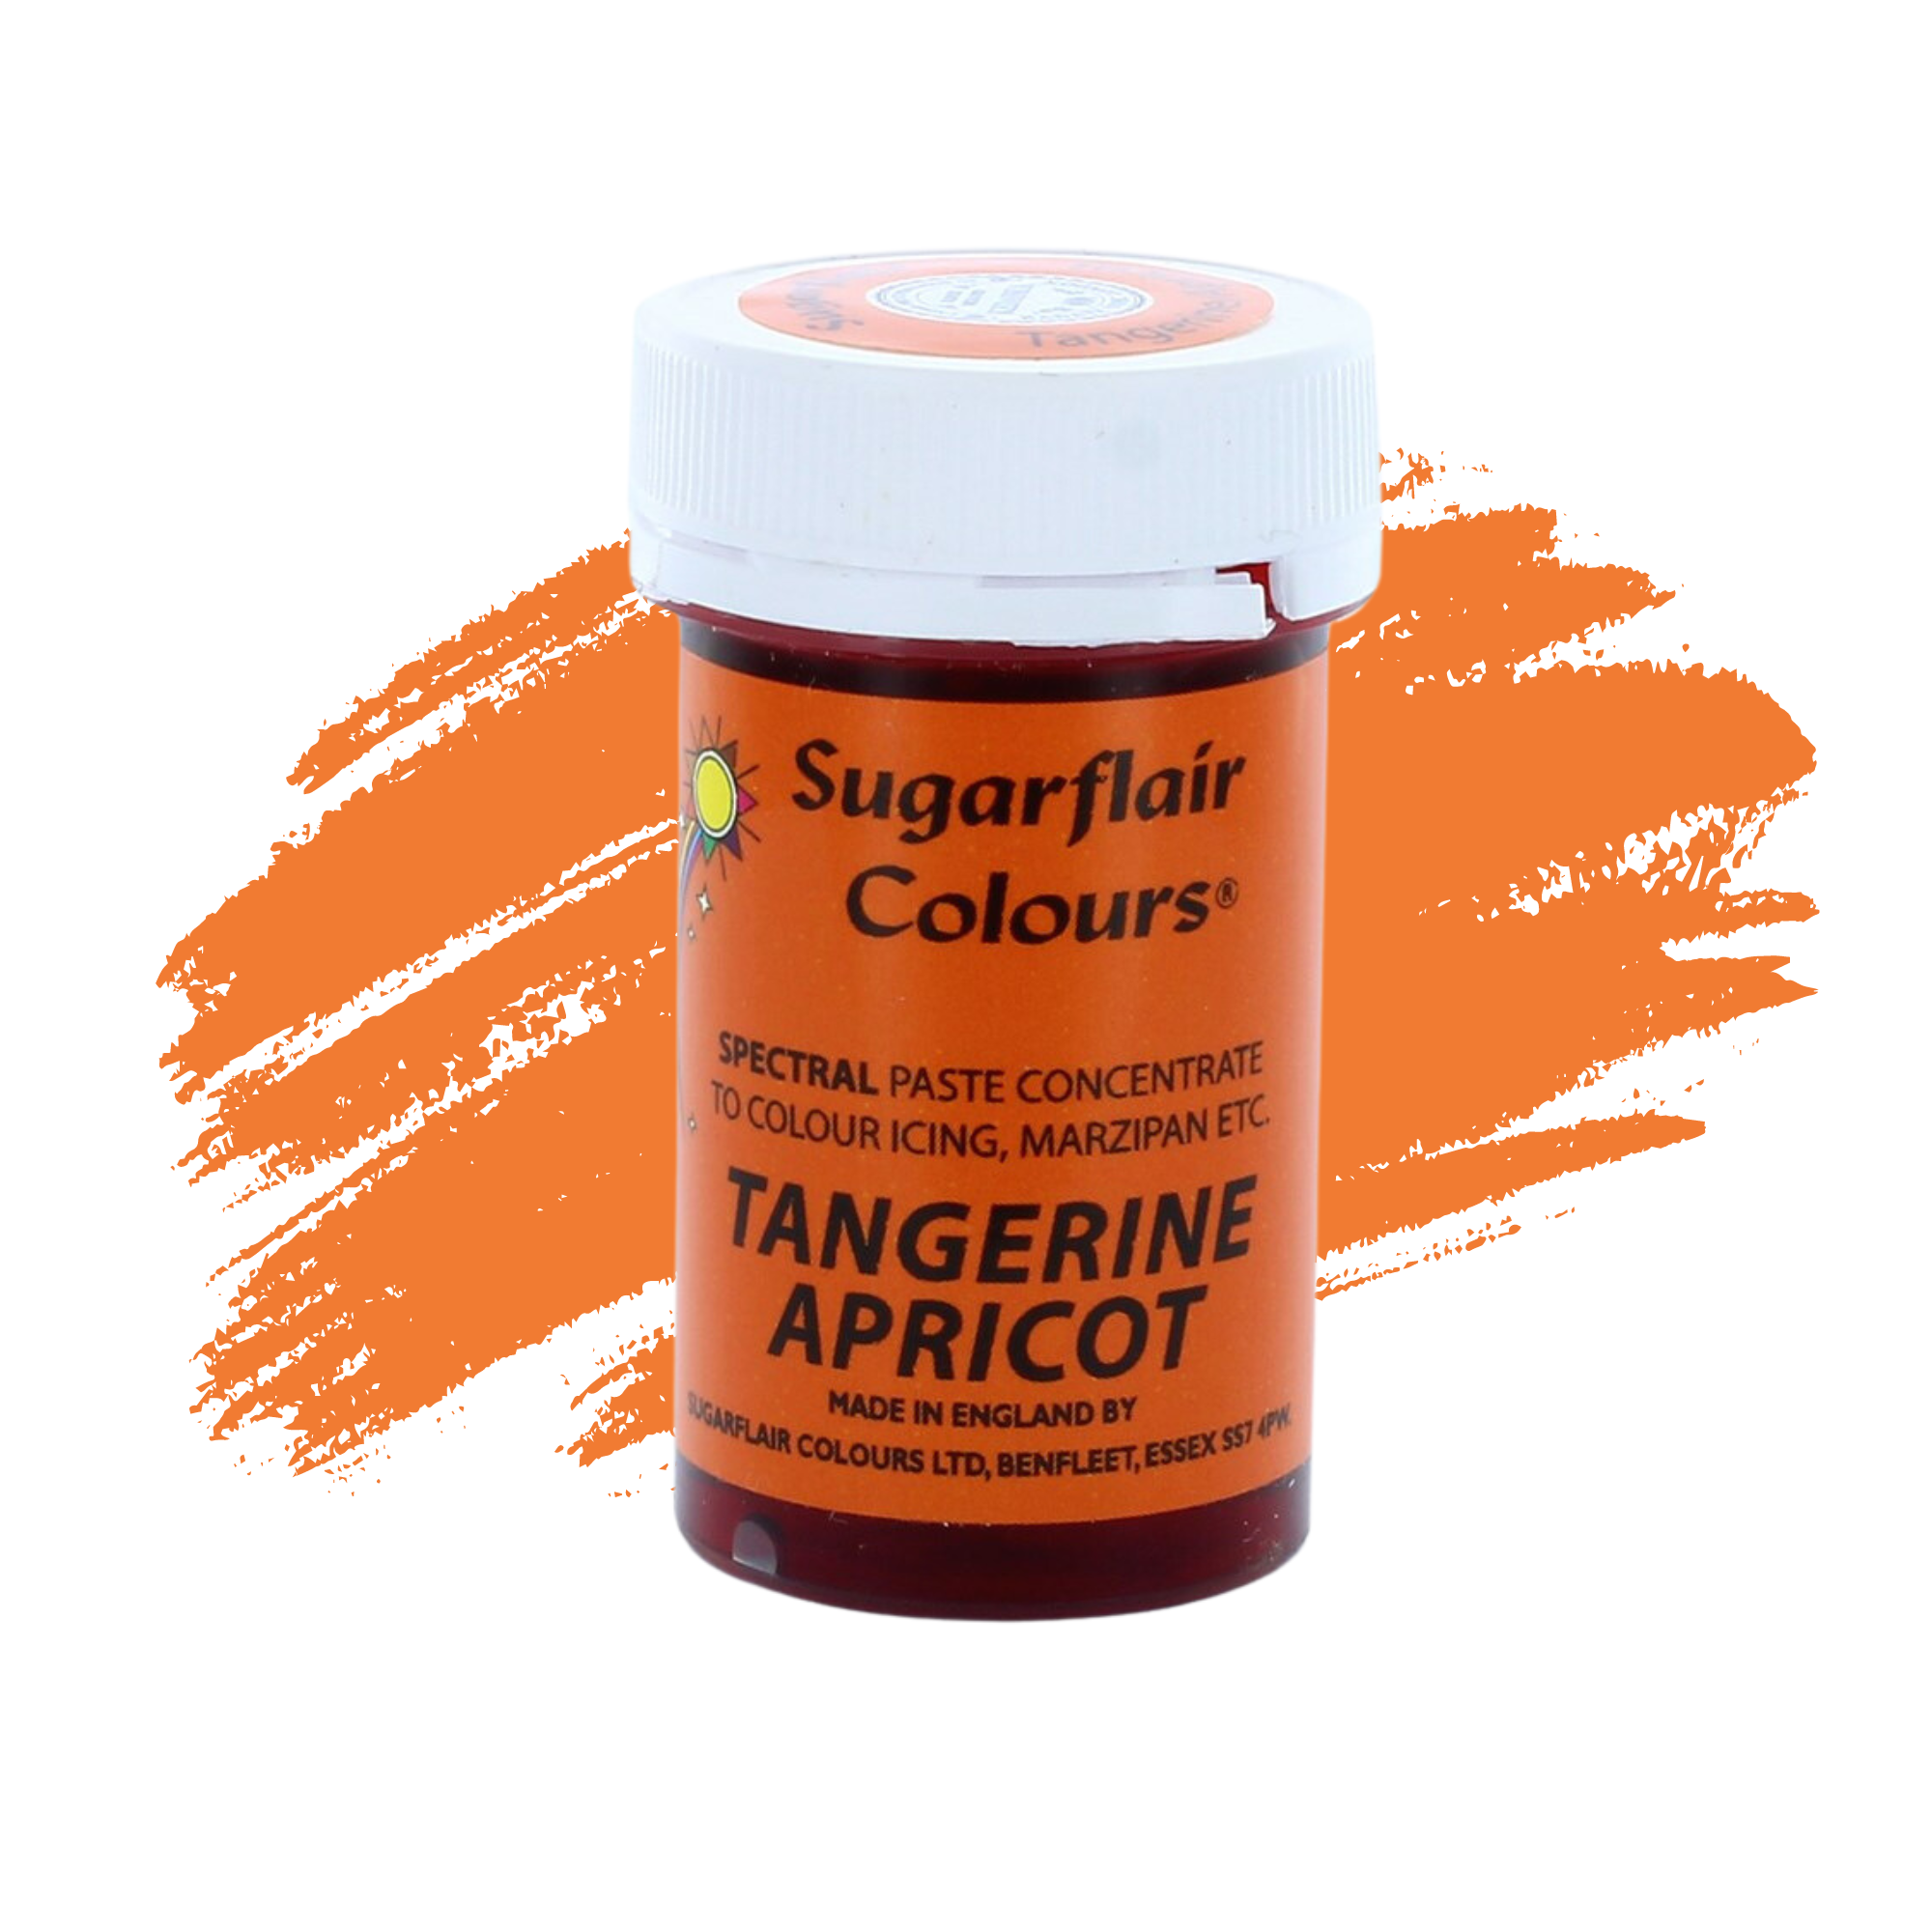 Sugarflair Paste Colours Concentrated Food Colouring - Spectral Tangerine Apricot - 25g